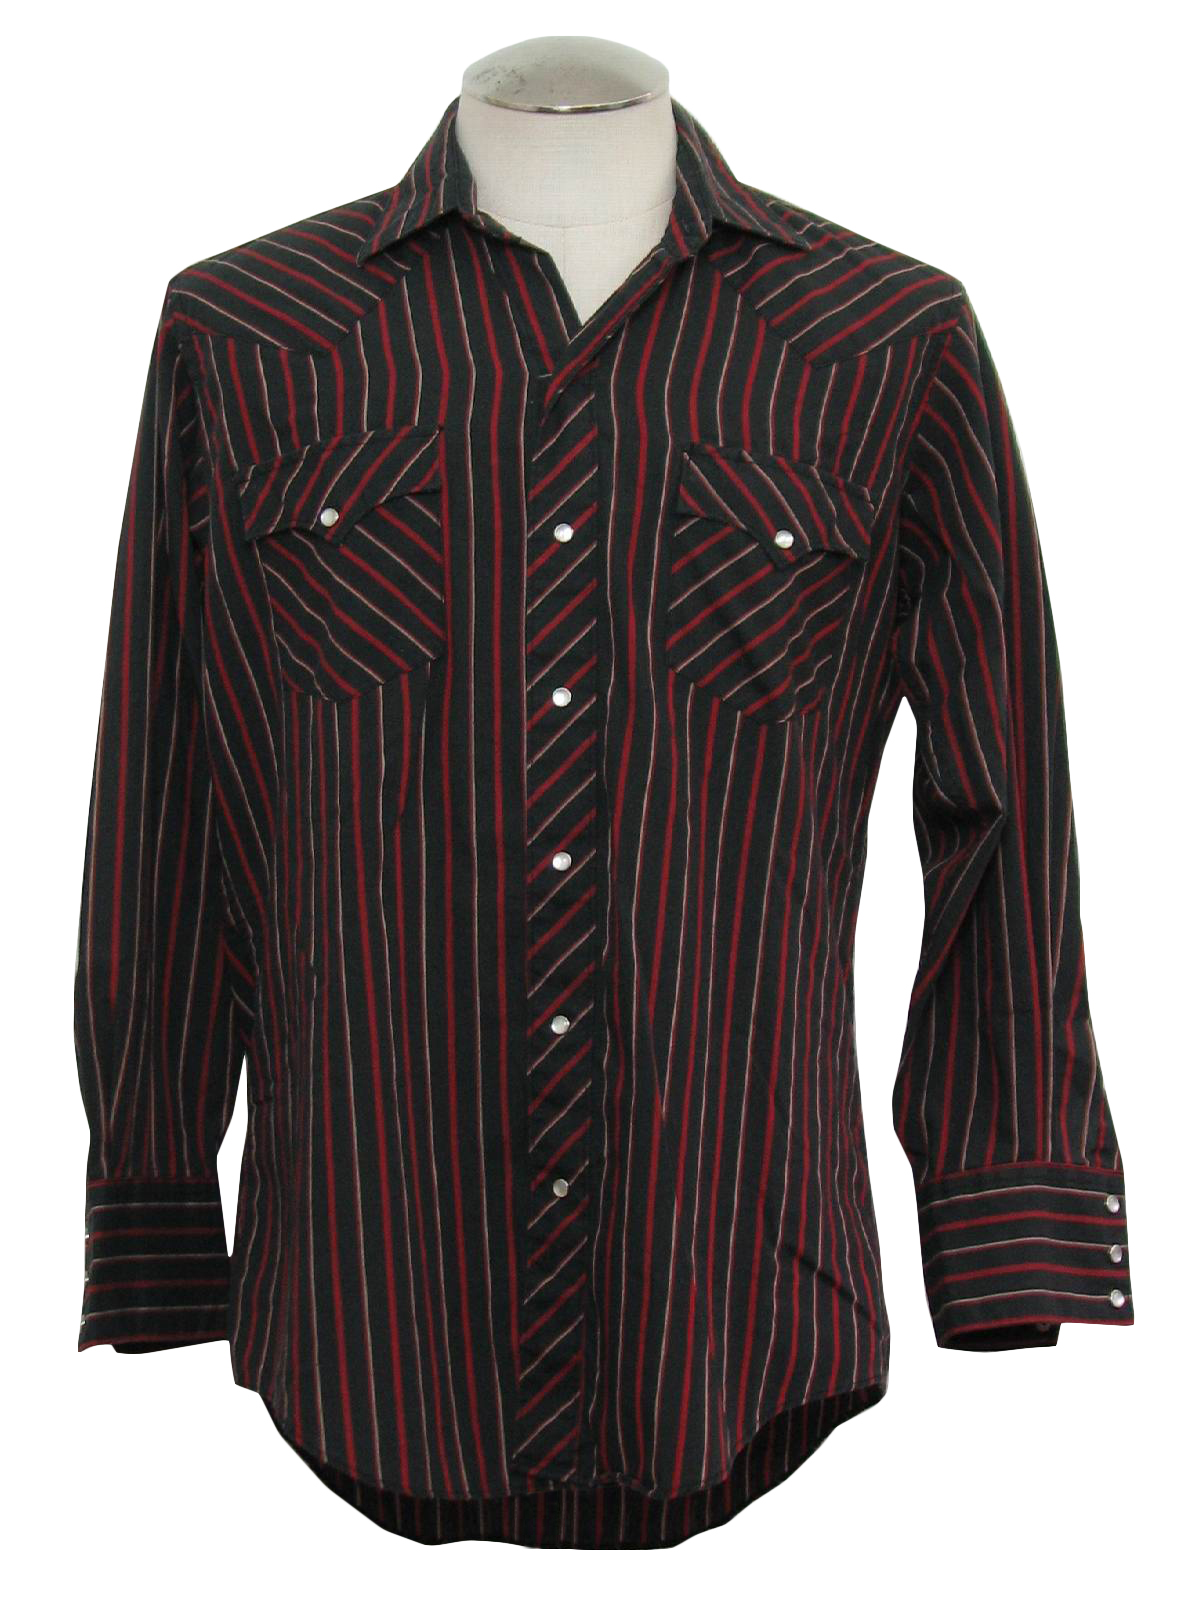 Retro 80's Western Shirt: 80s -Atb- Mens black, red and off white ...